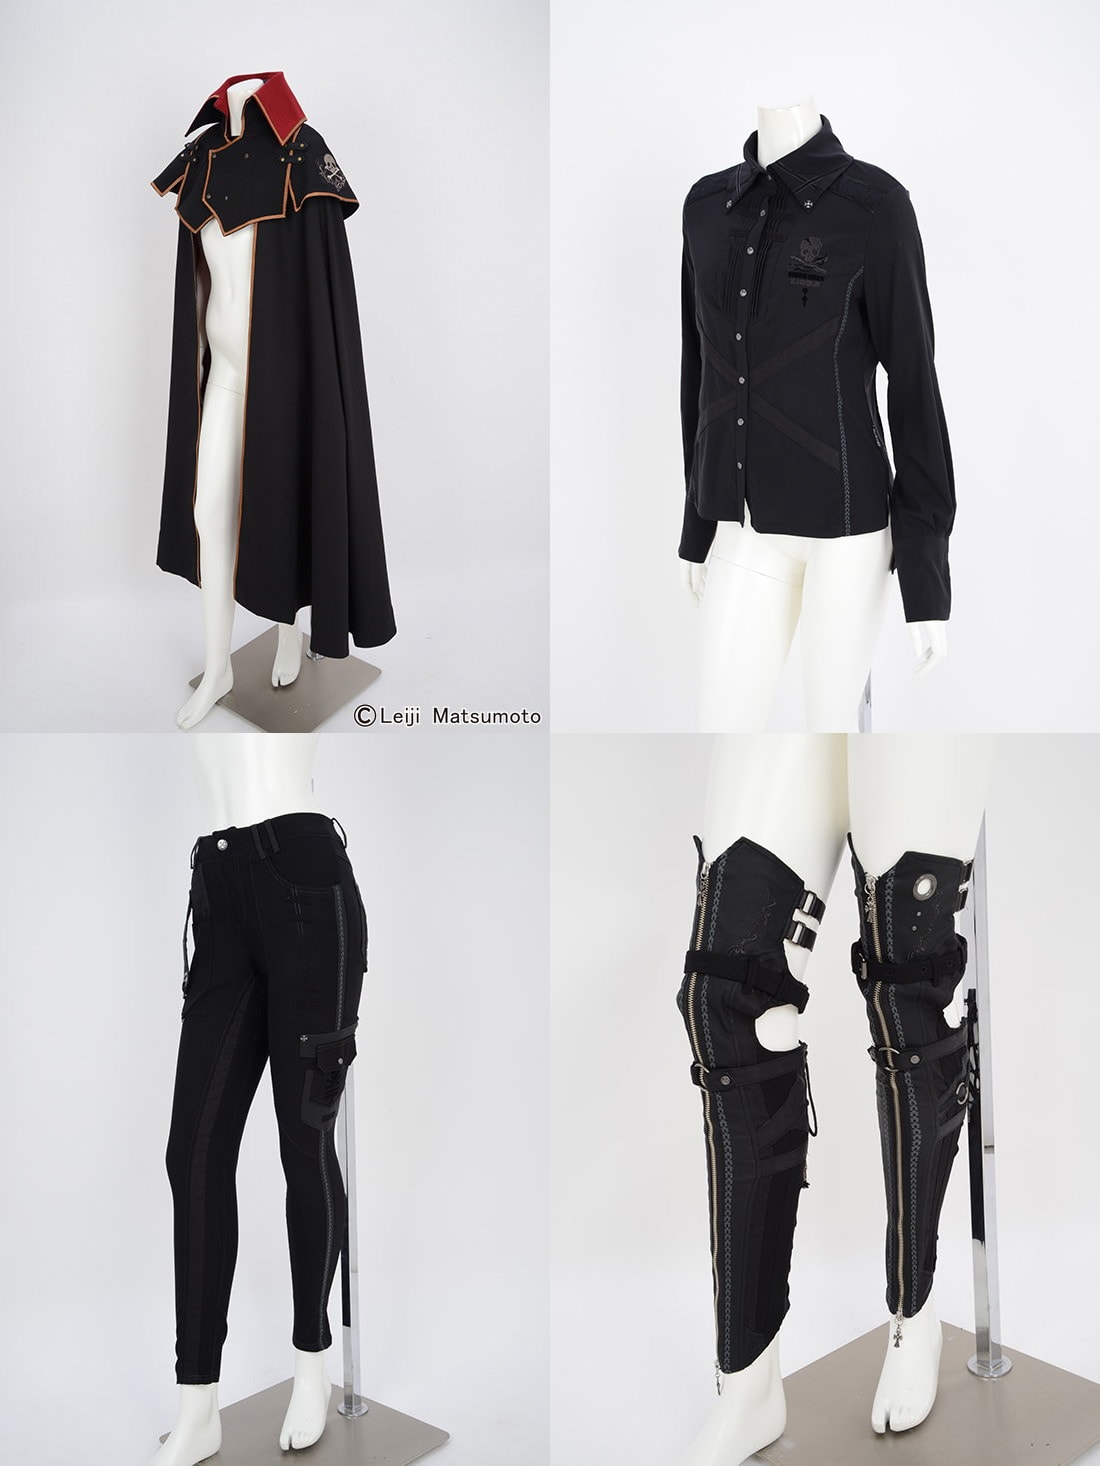 cape, blouse, pants, and leg covers inspired by Captain Harlock.